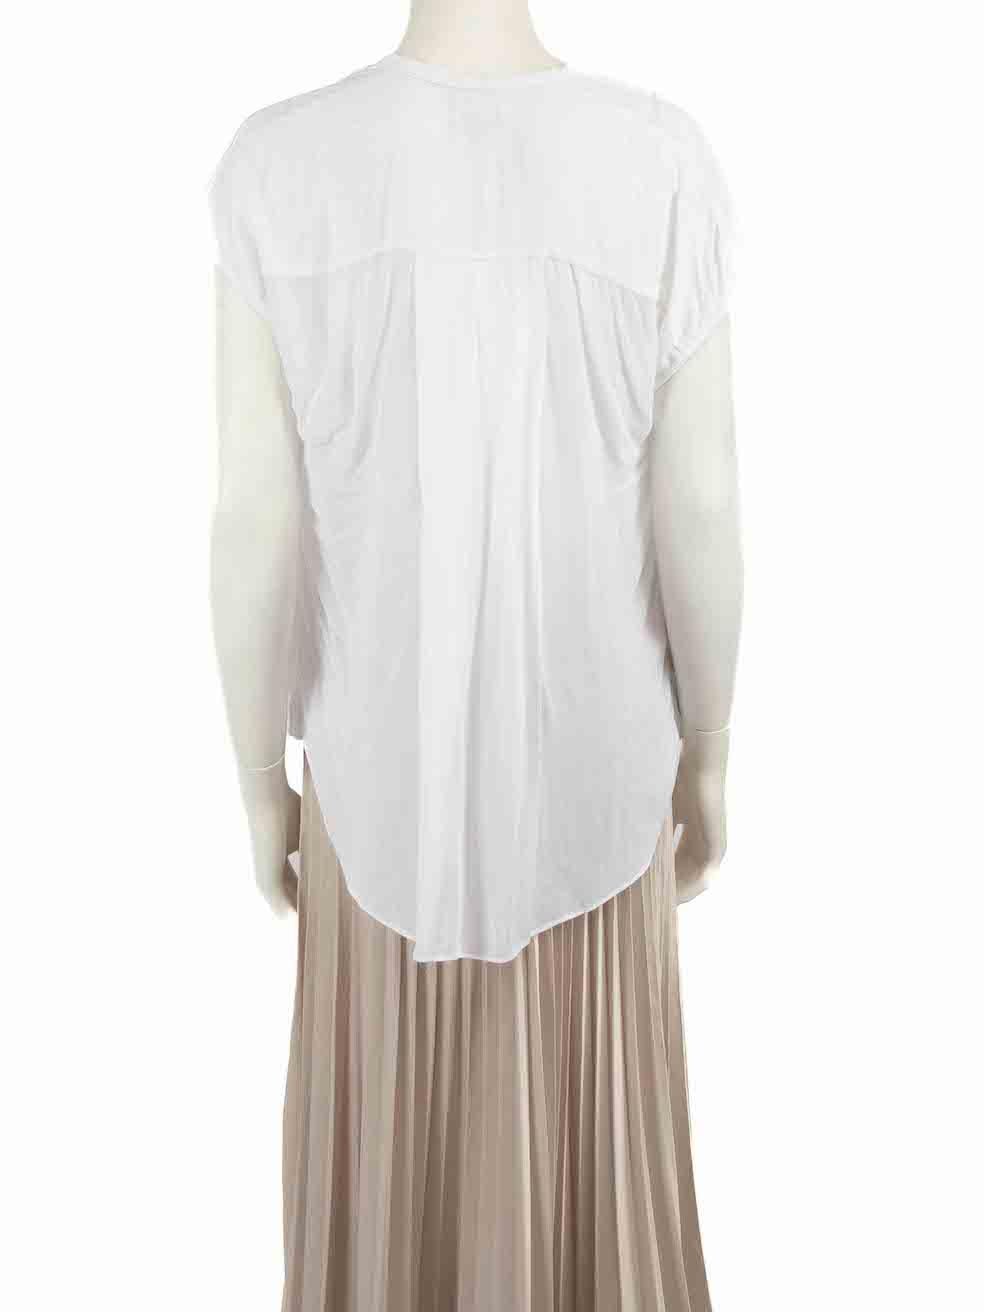 Helmut Lang White Draped Top Size S In Good Condition For Sale In London, GB